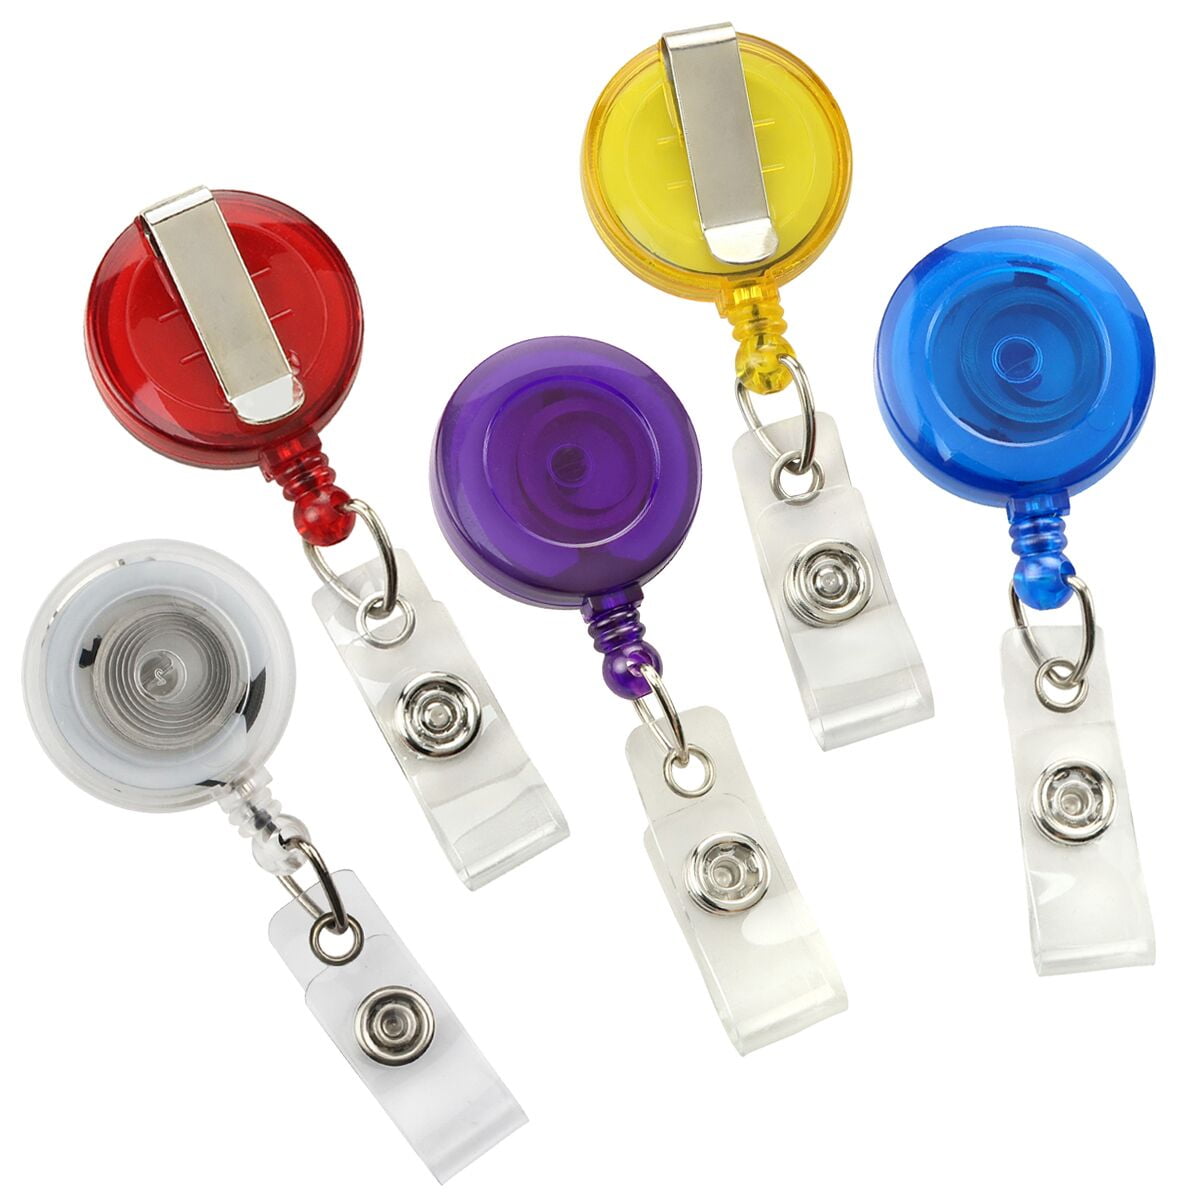 Retractable Badge Holders with Reel Clip for Office ID 24 in, 6 Pack Inspirational Happy Designs Print